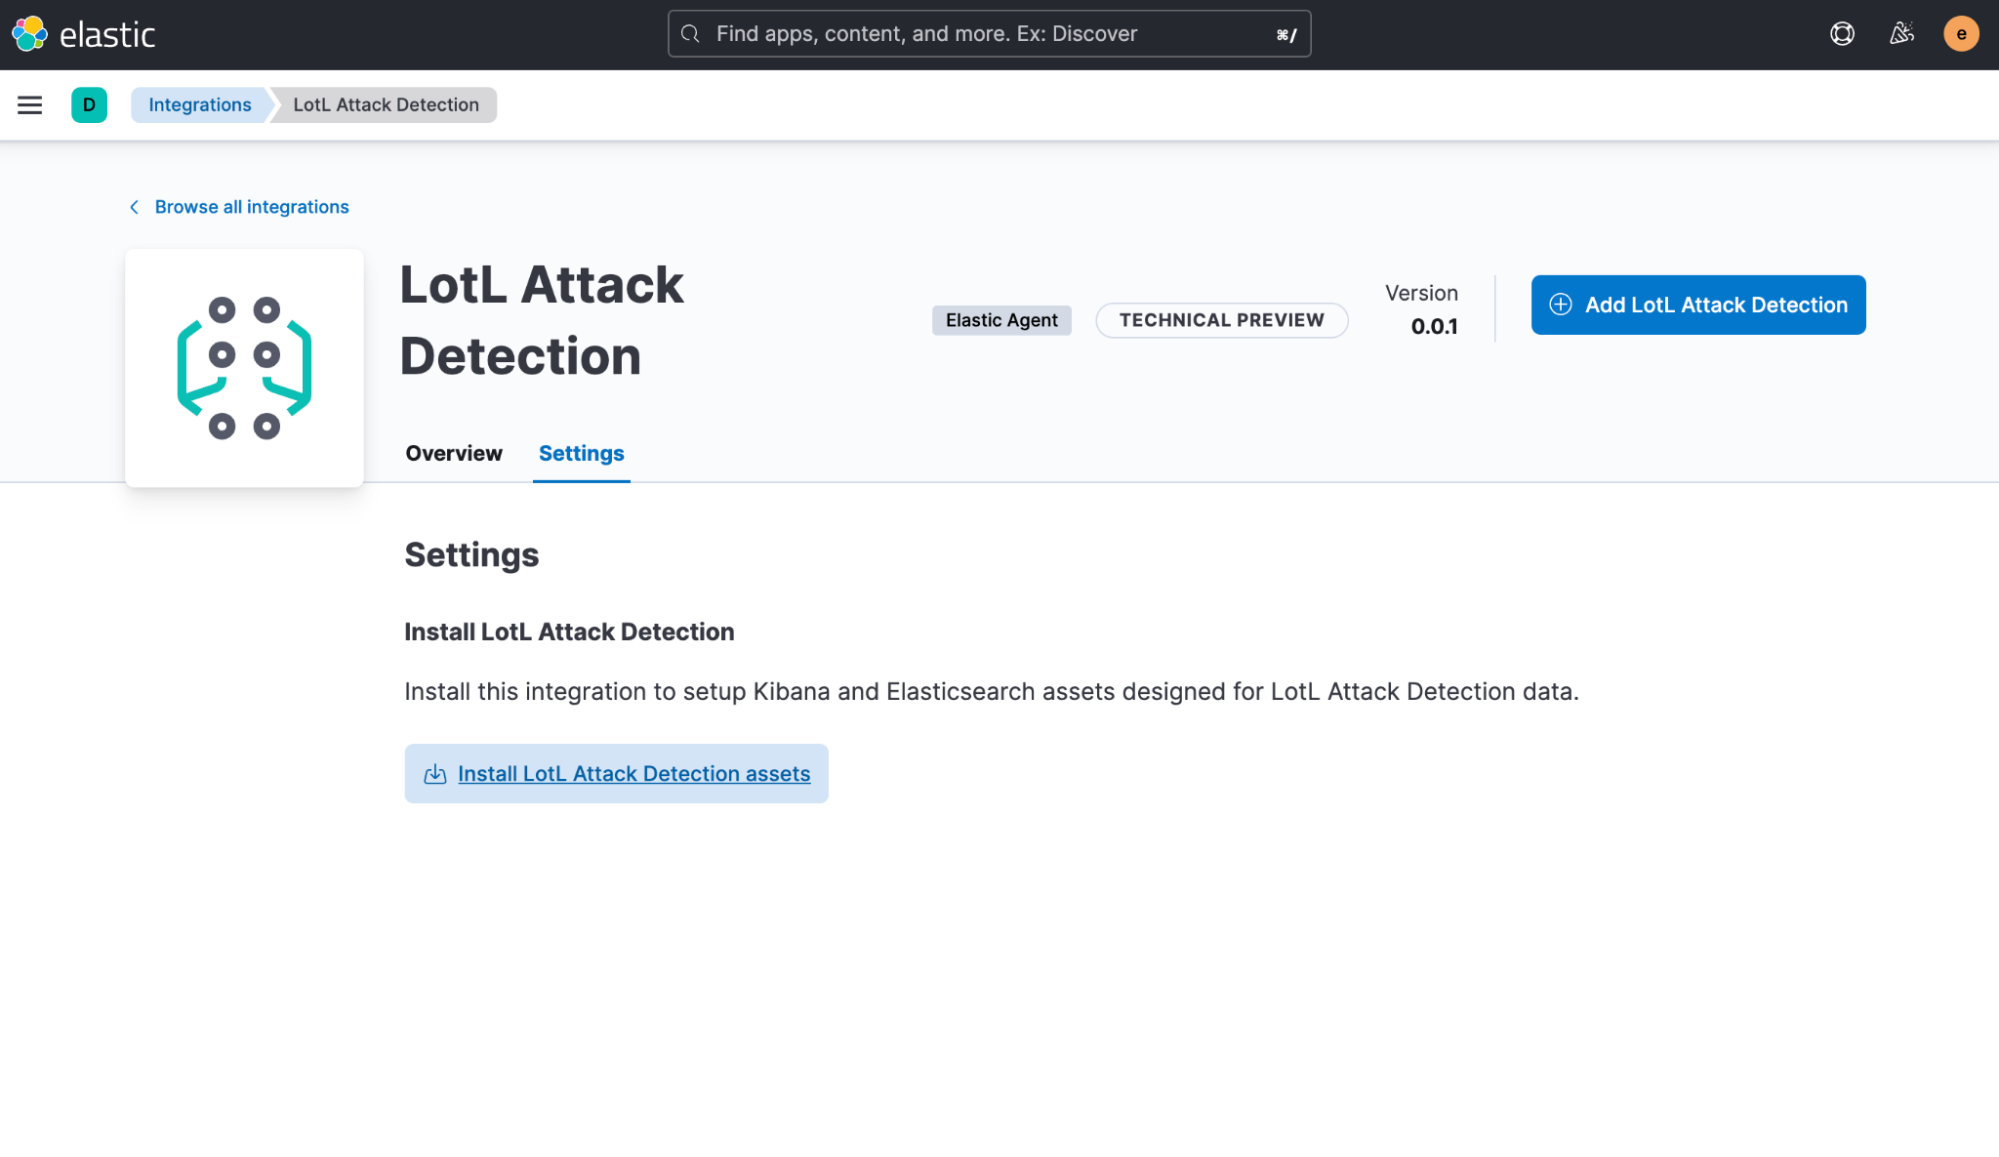 To install the assets, click the Install LotL Attack Detection assets button under the Settings tab.